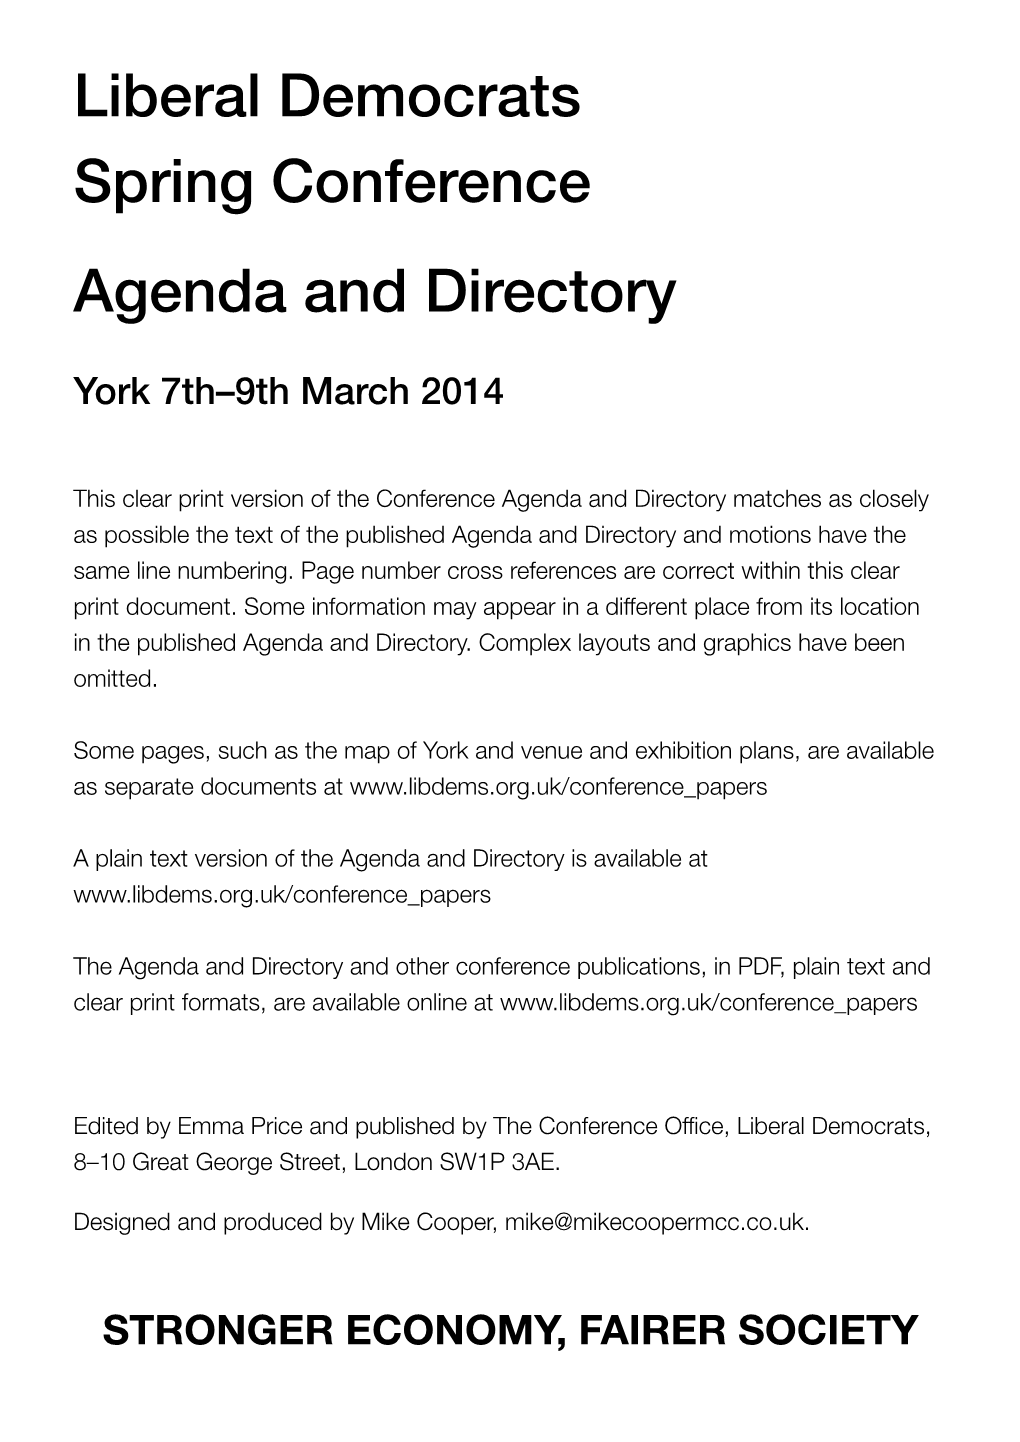 Liberal Democrats Spring Conference Agenda and Directory